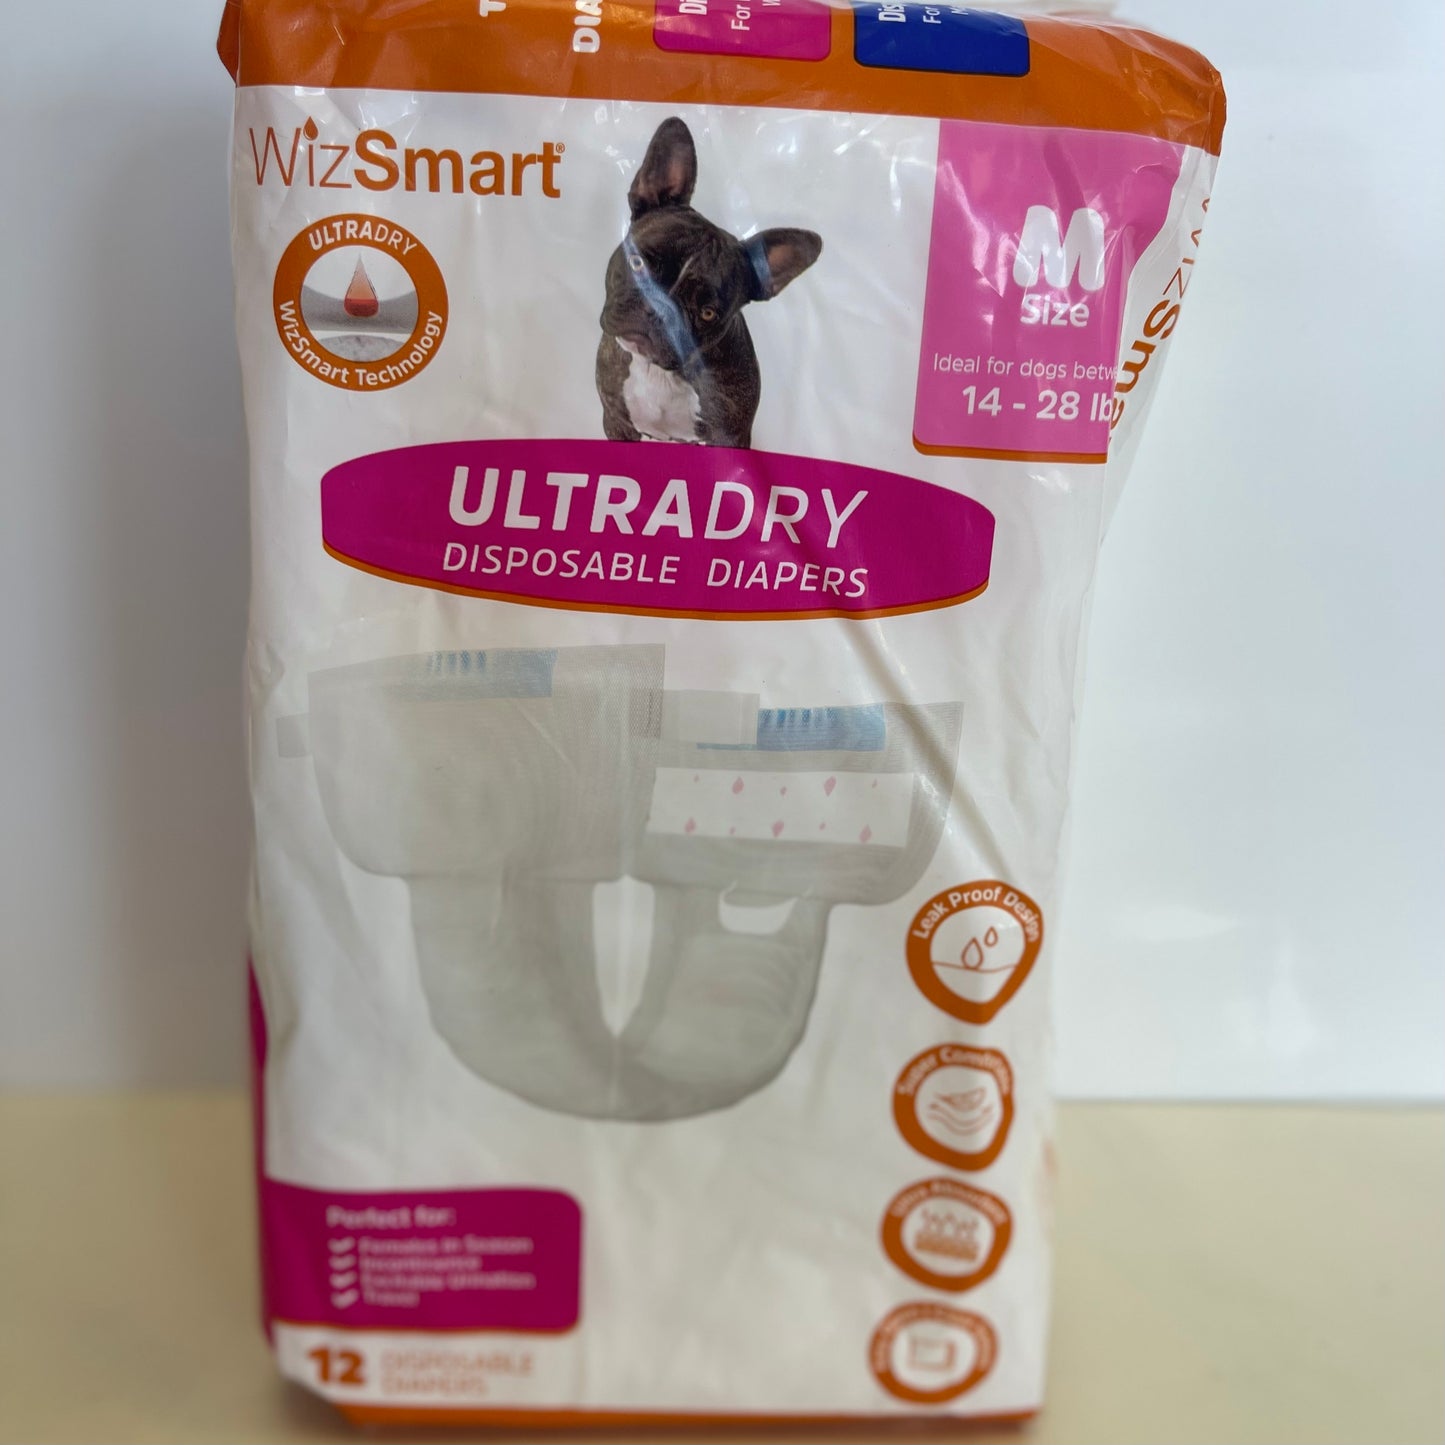 WizSmart Ultradry Disposable Diapers 12CT